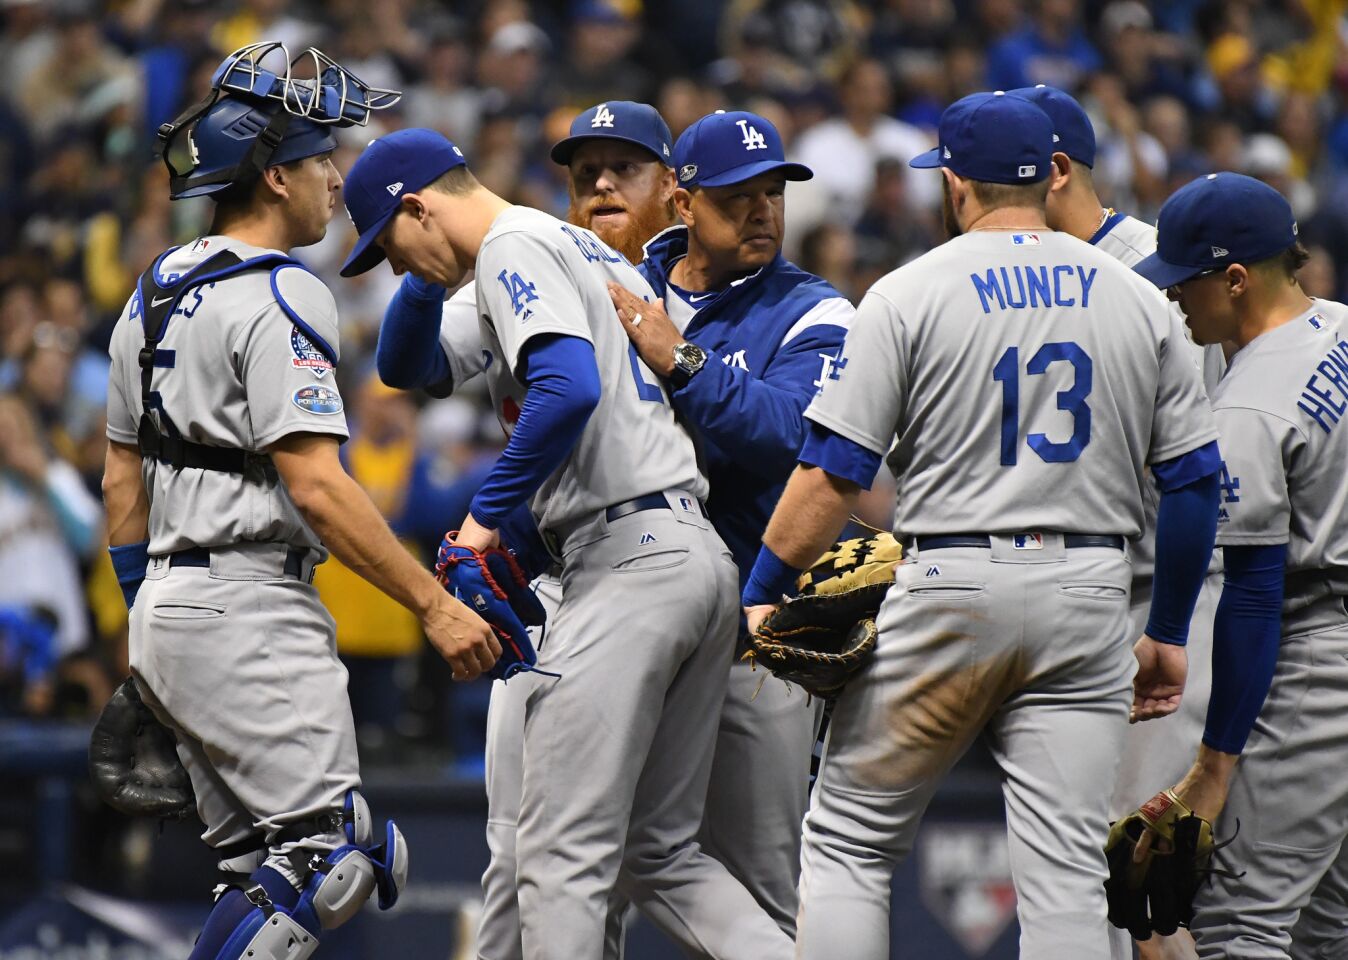 Dodgers manager Dave Roberts pats Walker Buehler after taking him out of the game in the fifth inning.